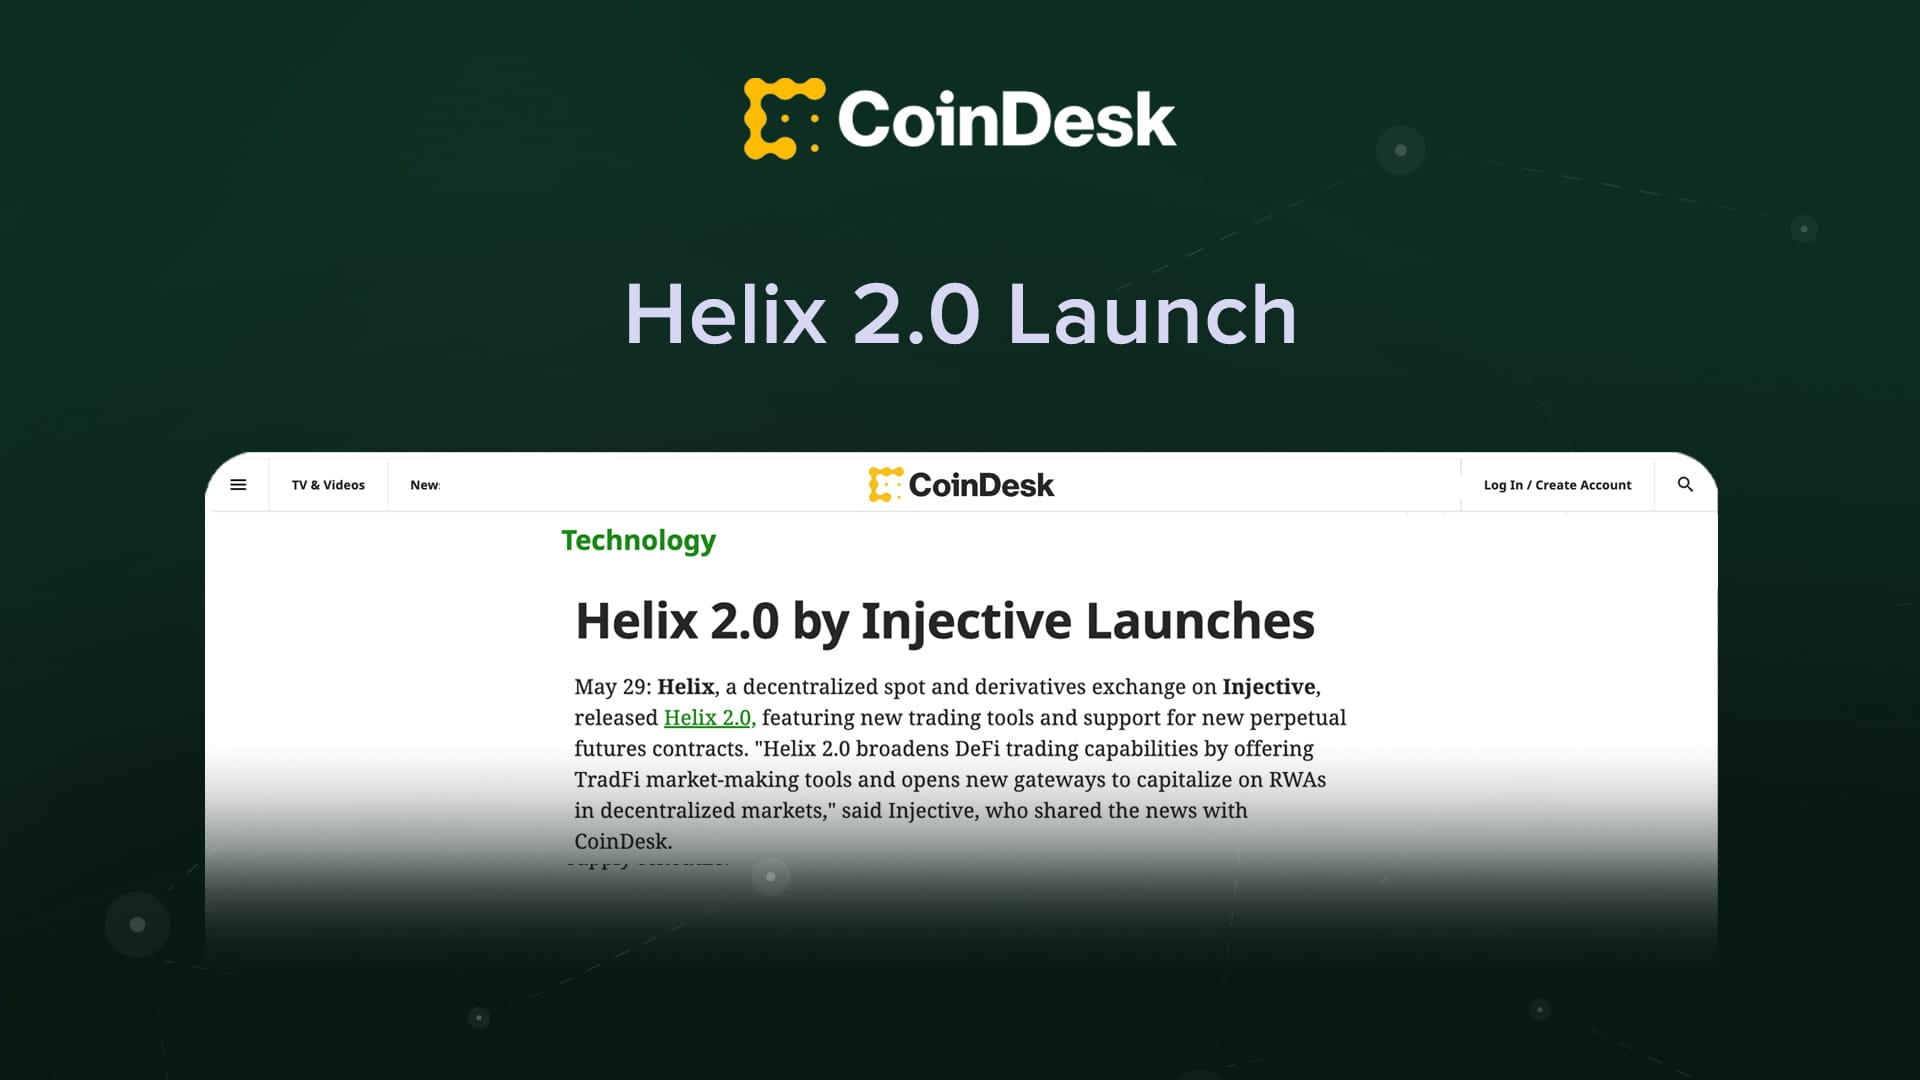 (CoinDesk) Helix 2.0 by Injective Launches